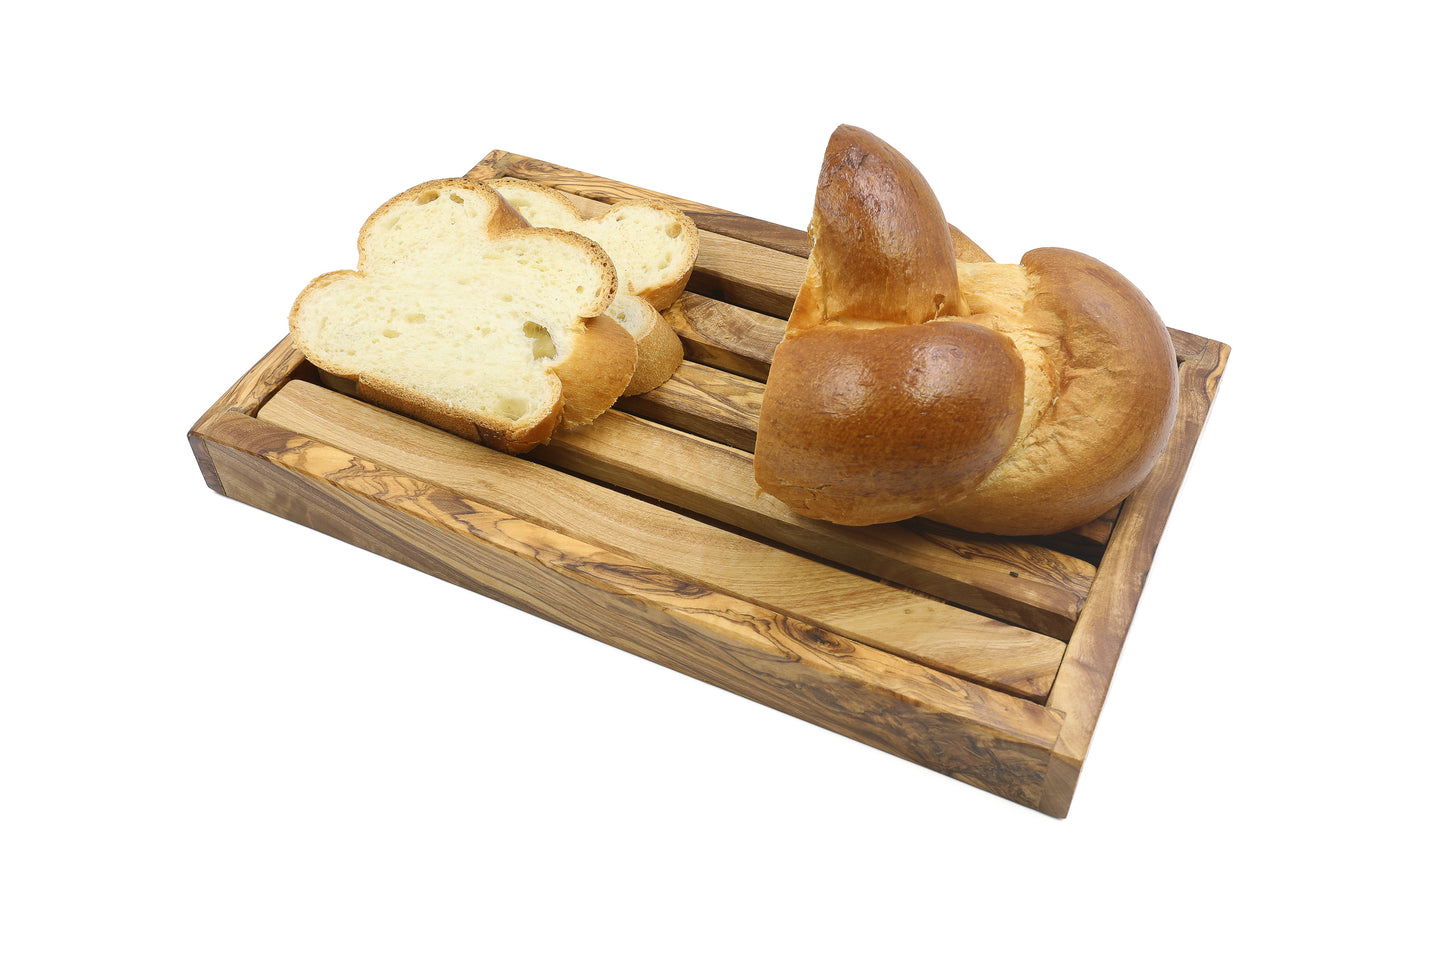 Unique olive wood kitchen accessory for slicing bread with a handy crumb catcher